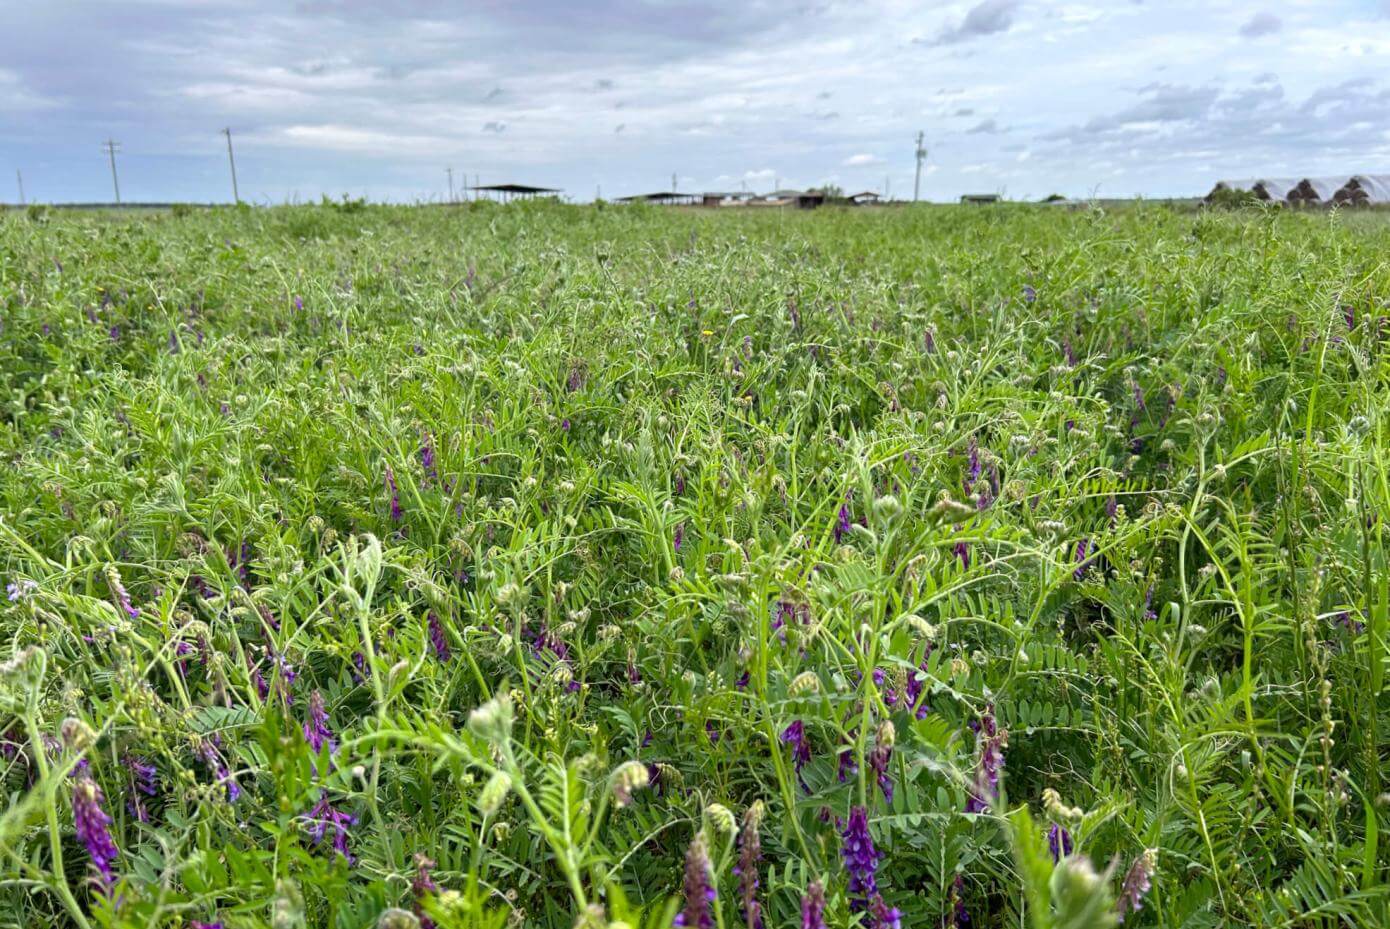 Patagonia Inta vetch plant and flowers in a field